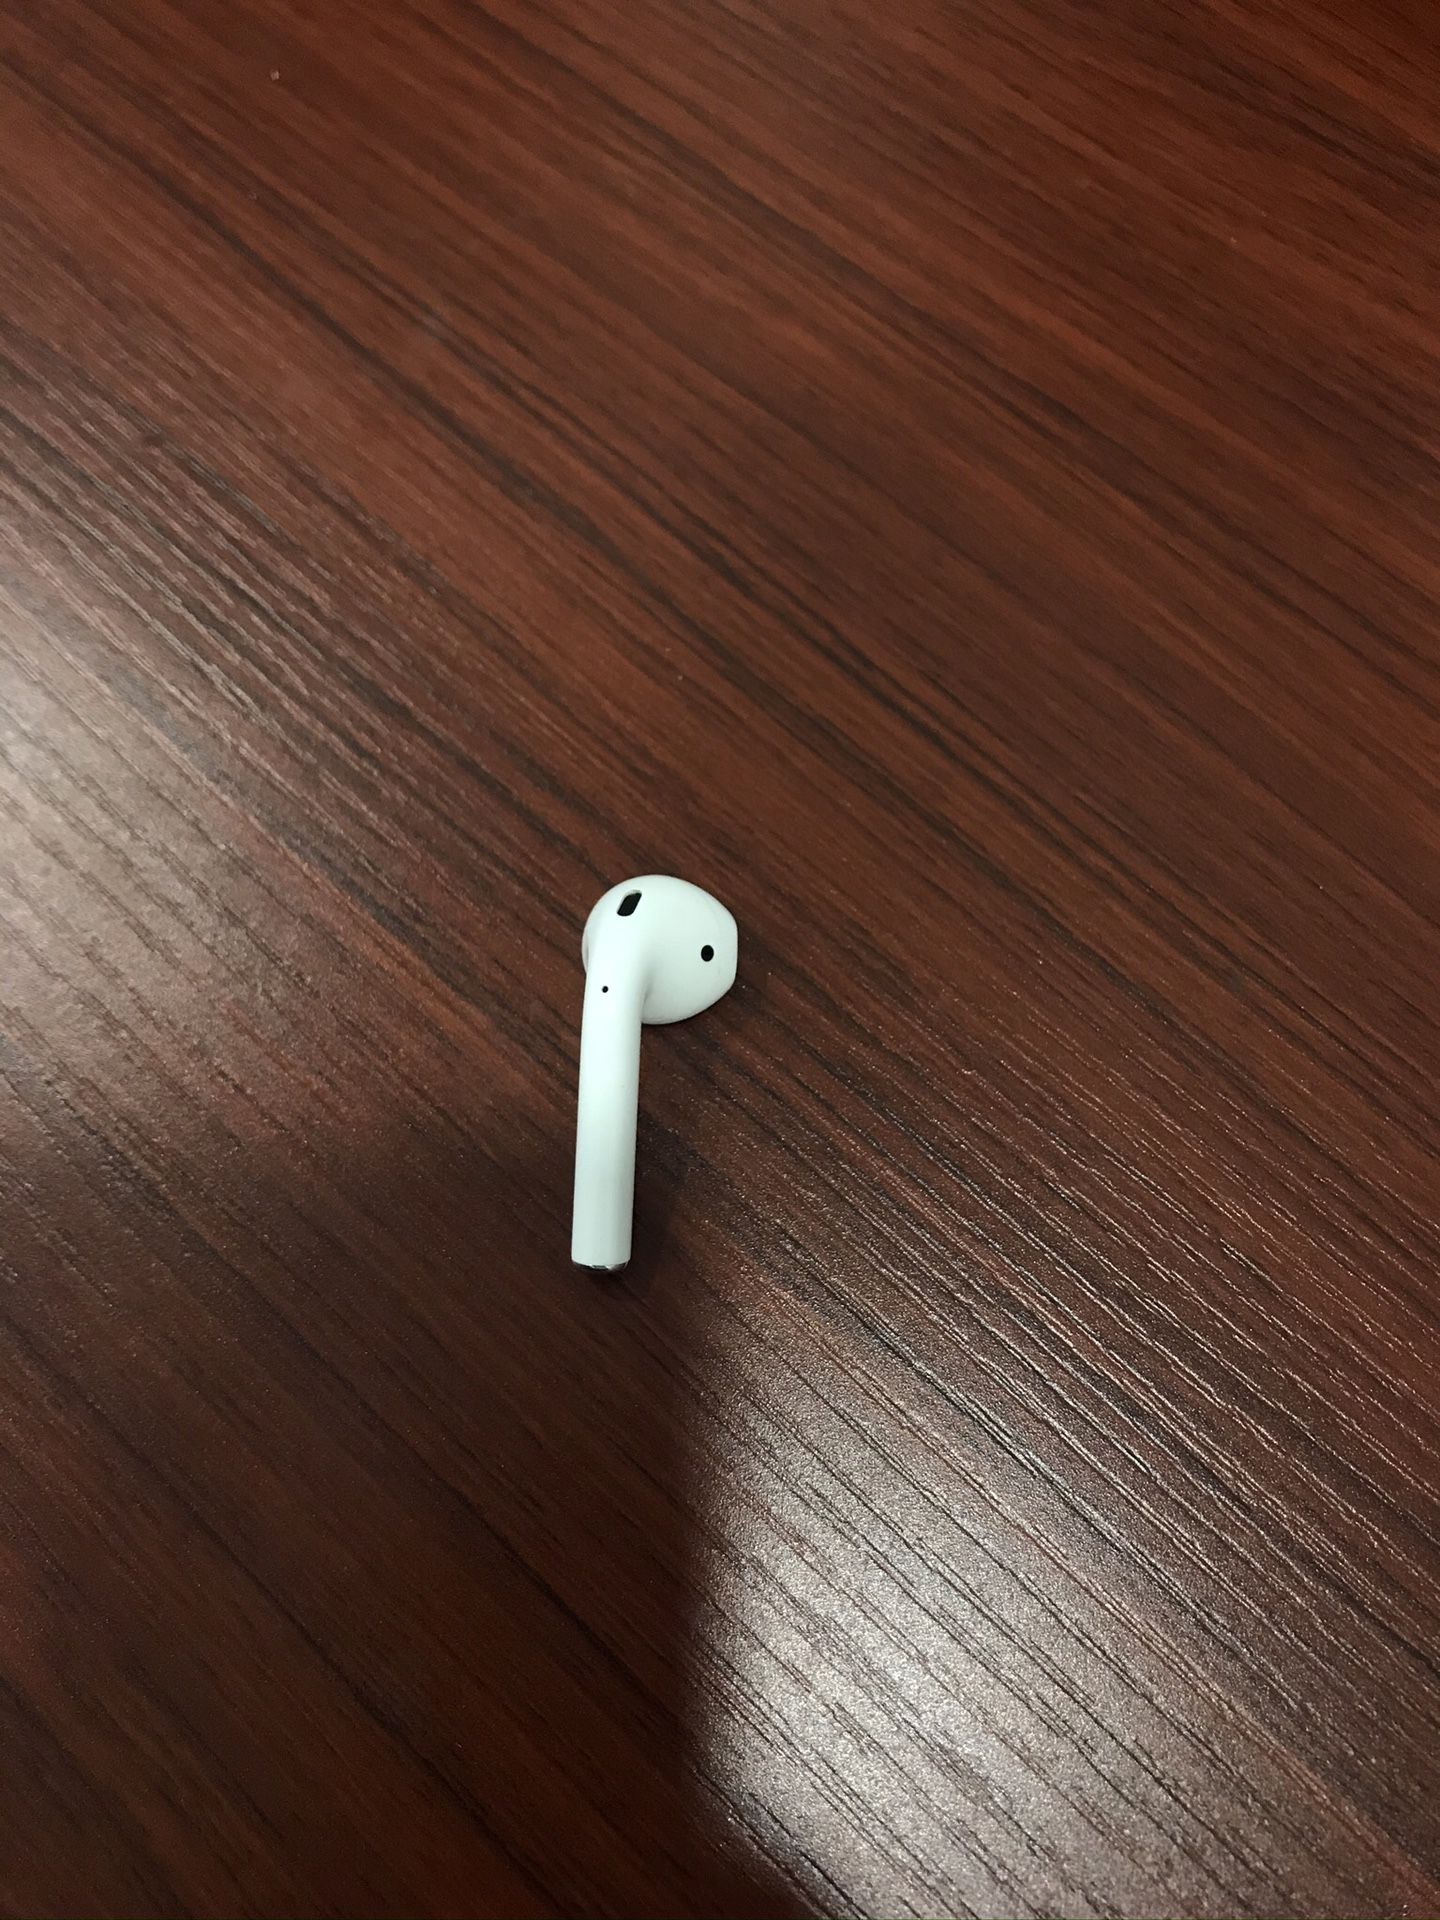 AirPods (right only)